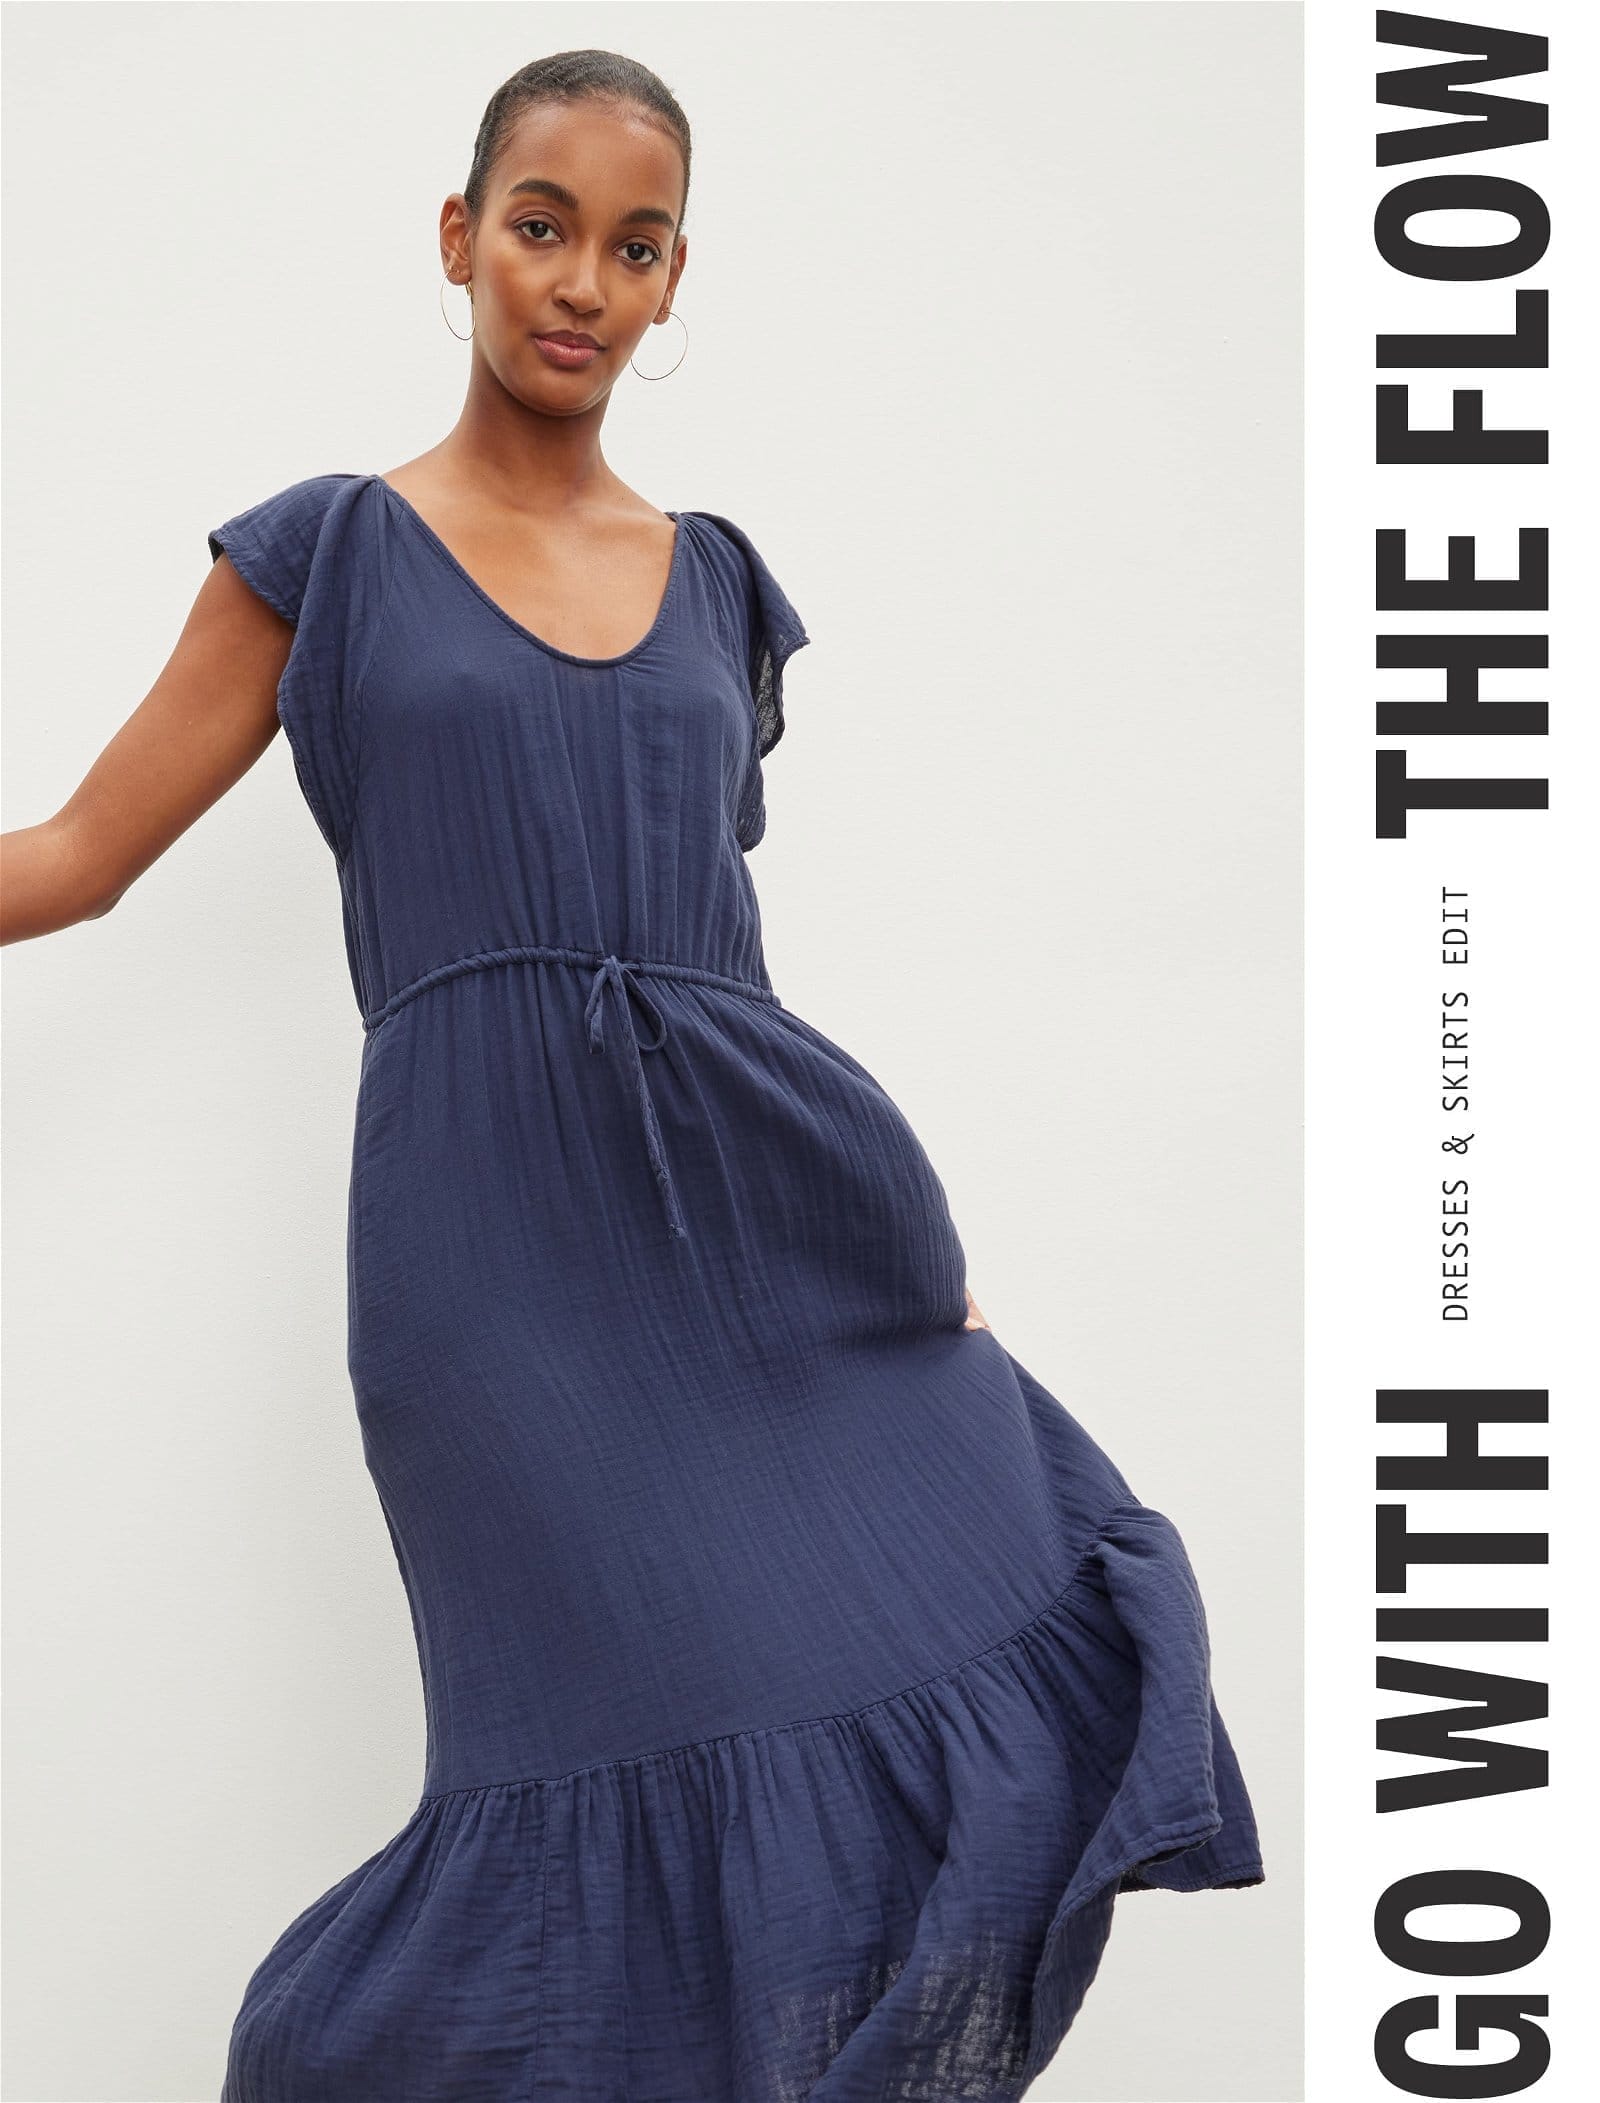 GO WITH THE FLOW: DRESSES & SKIRTS EDIT